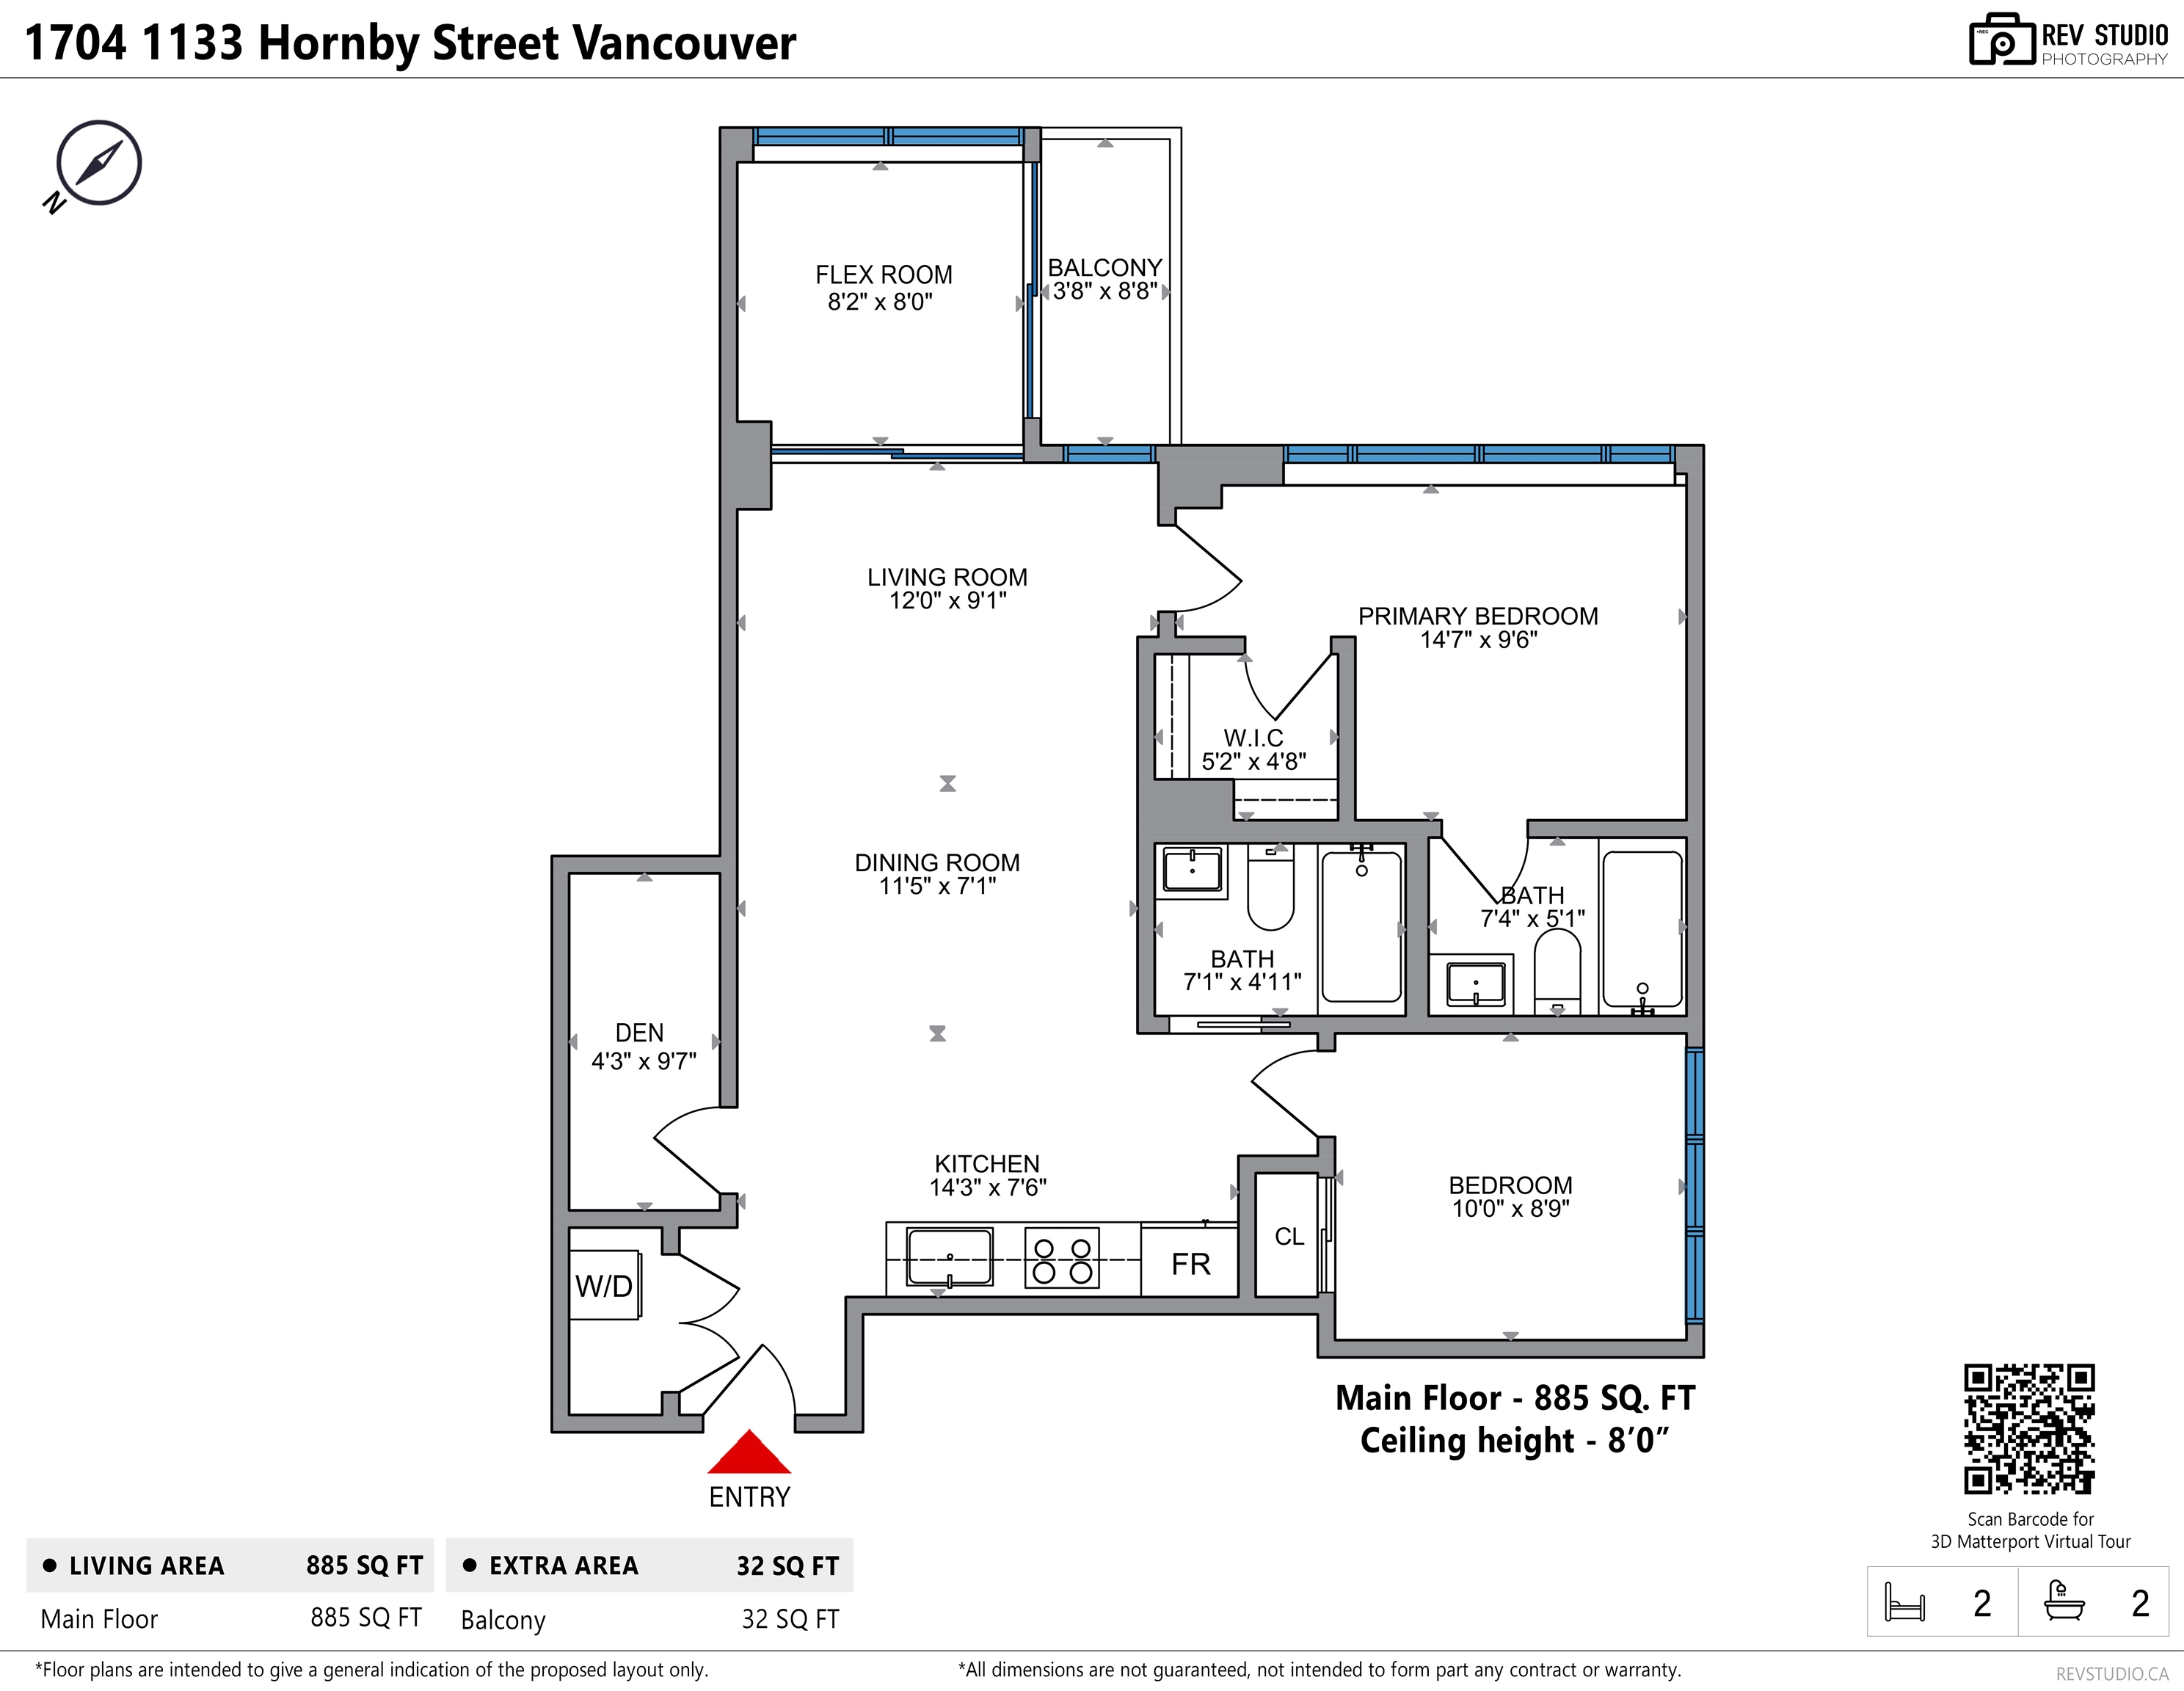 1704-1133 HORNBY STREET, Vancouver, British Columbia R2871687